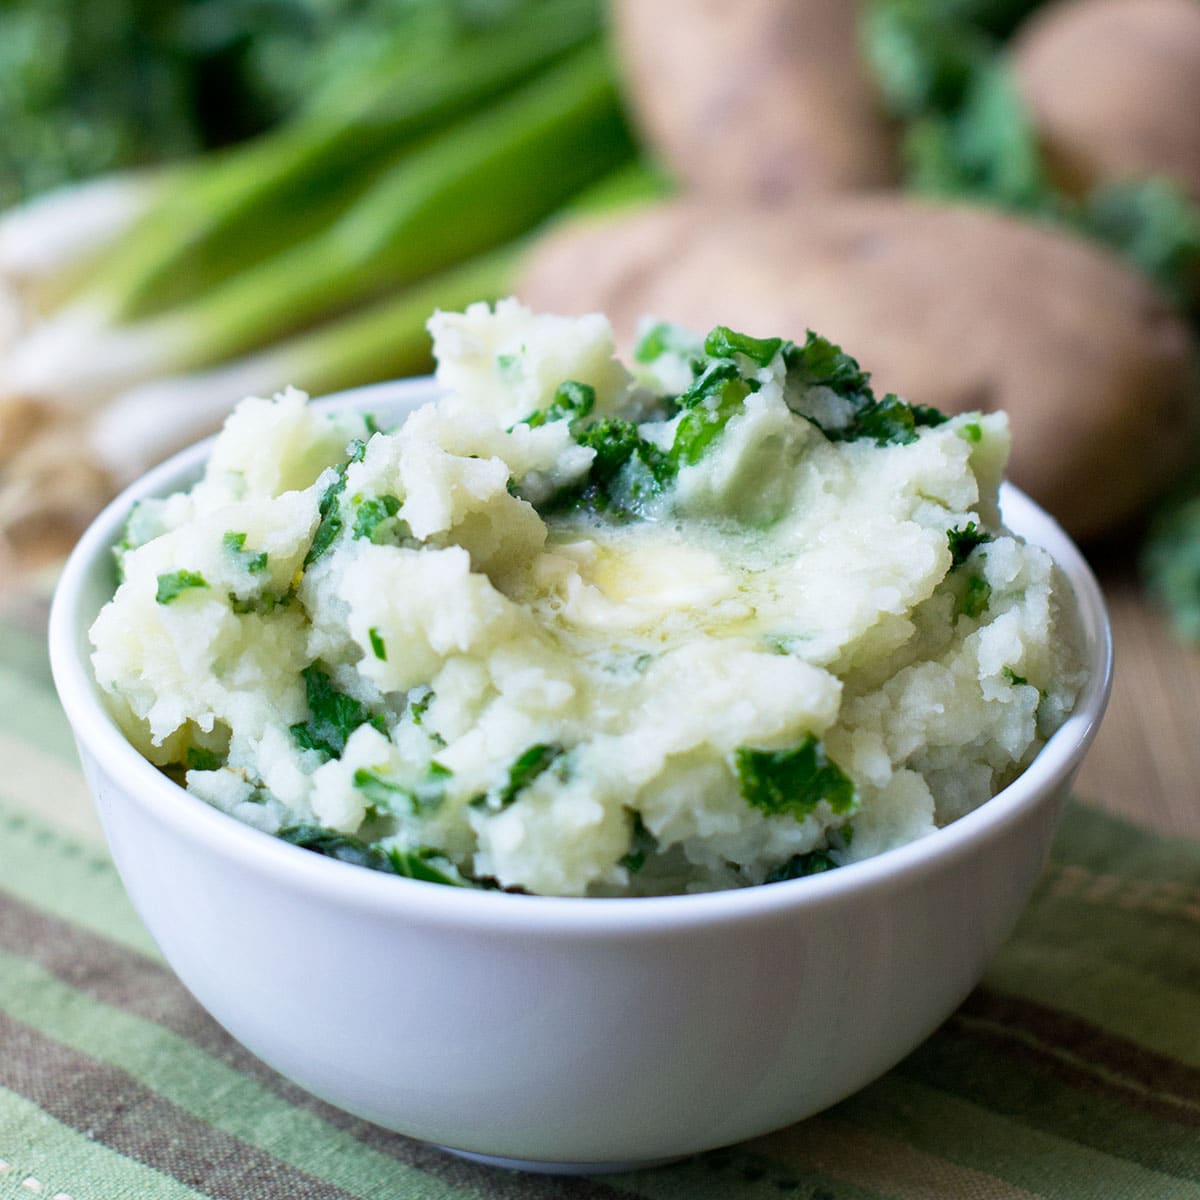 A bowl of Irish Colcannon (mashed potatoes mixed with wilted kale, topped with butter that is melting on top